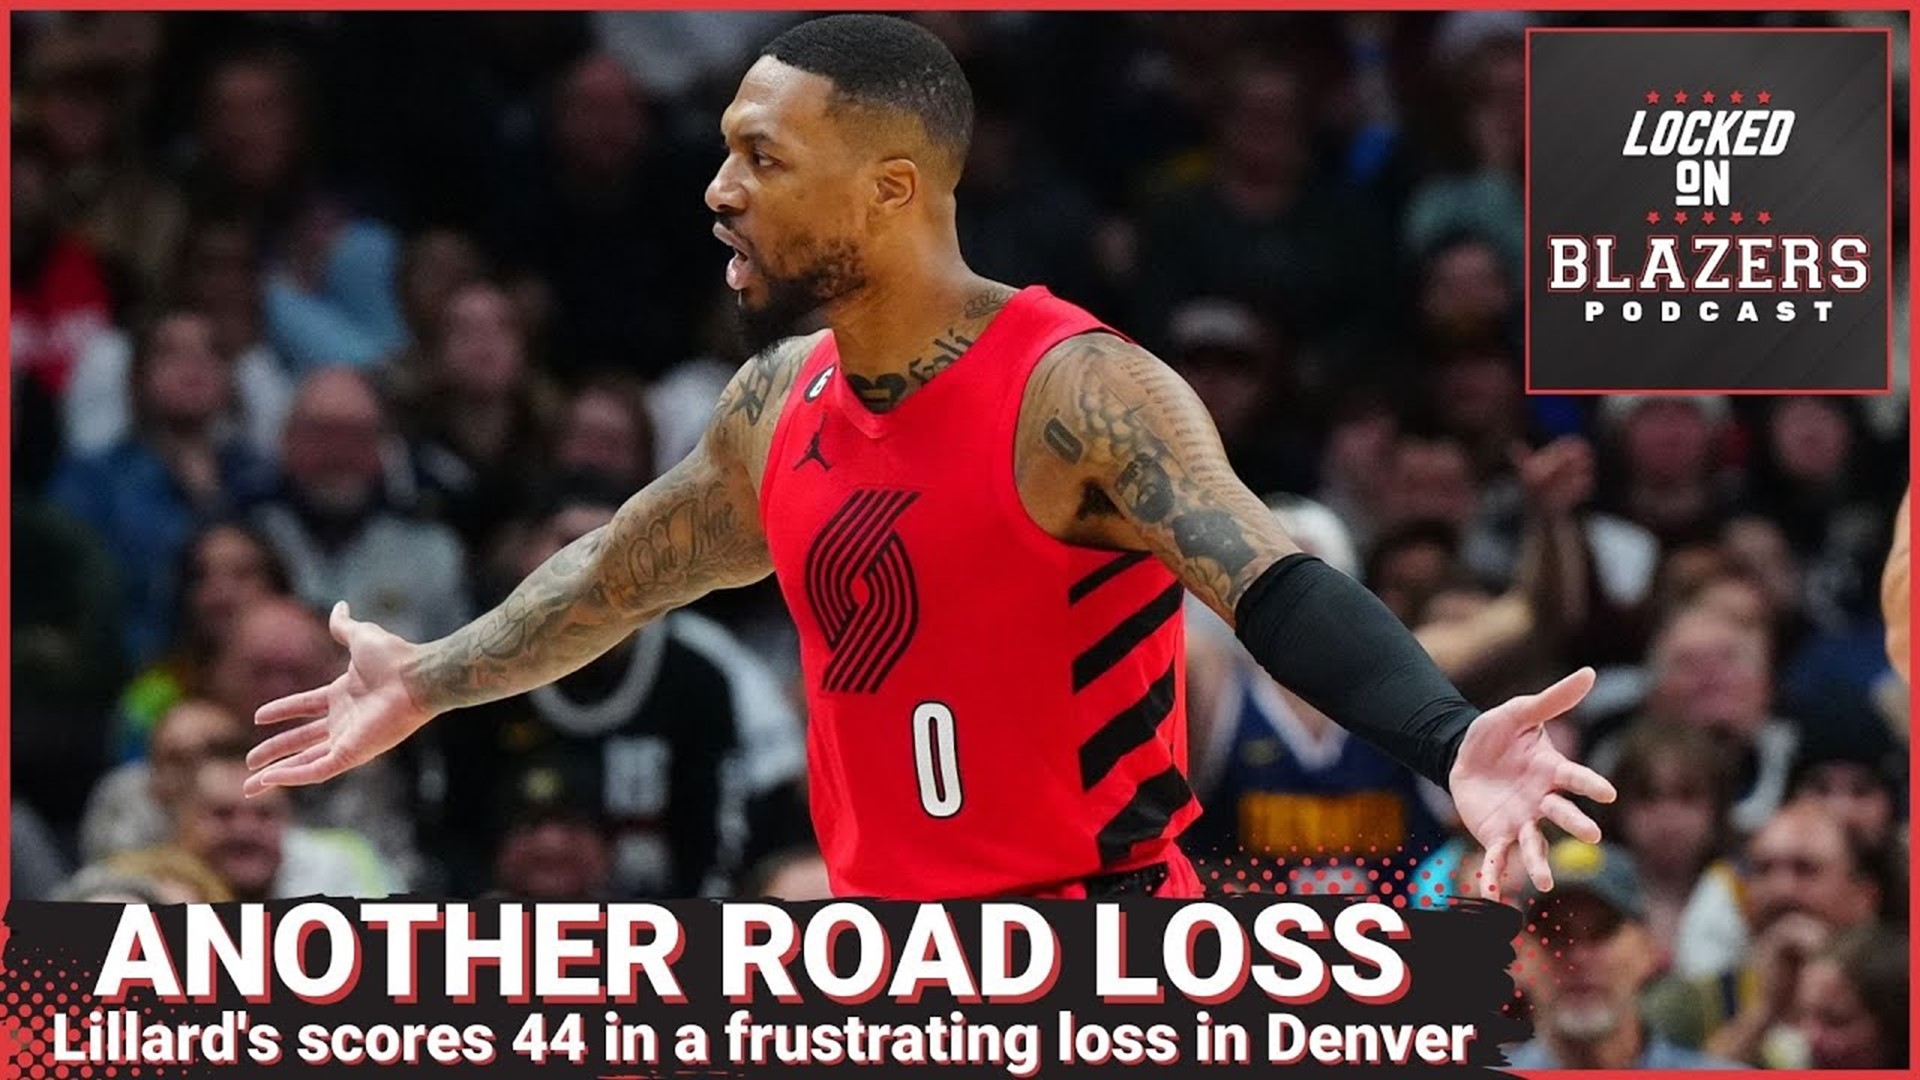 All of the Blazers season-long issues showed up in the second half: turnovers in bunches, lack of secondary scoring punch and an ice cold fourth quarter.